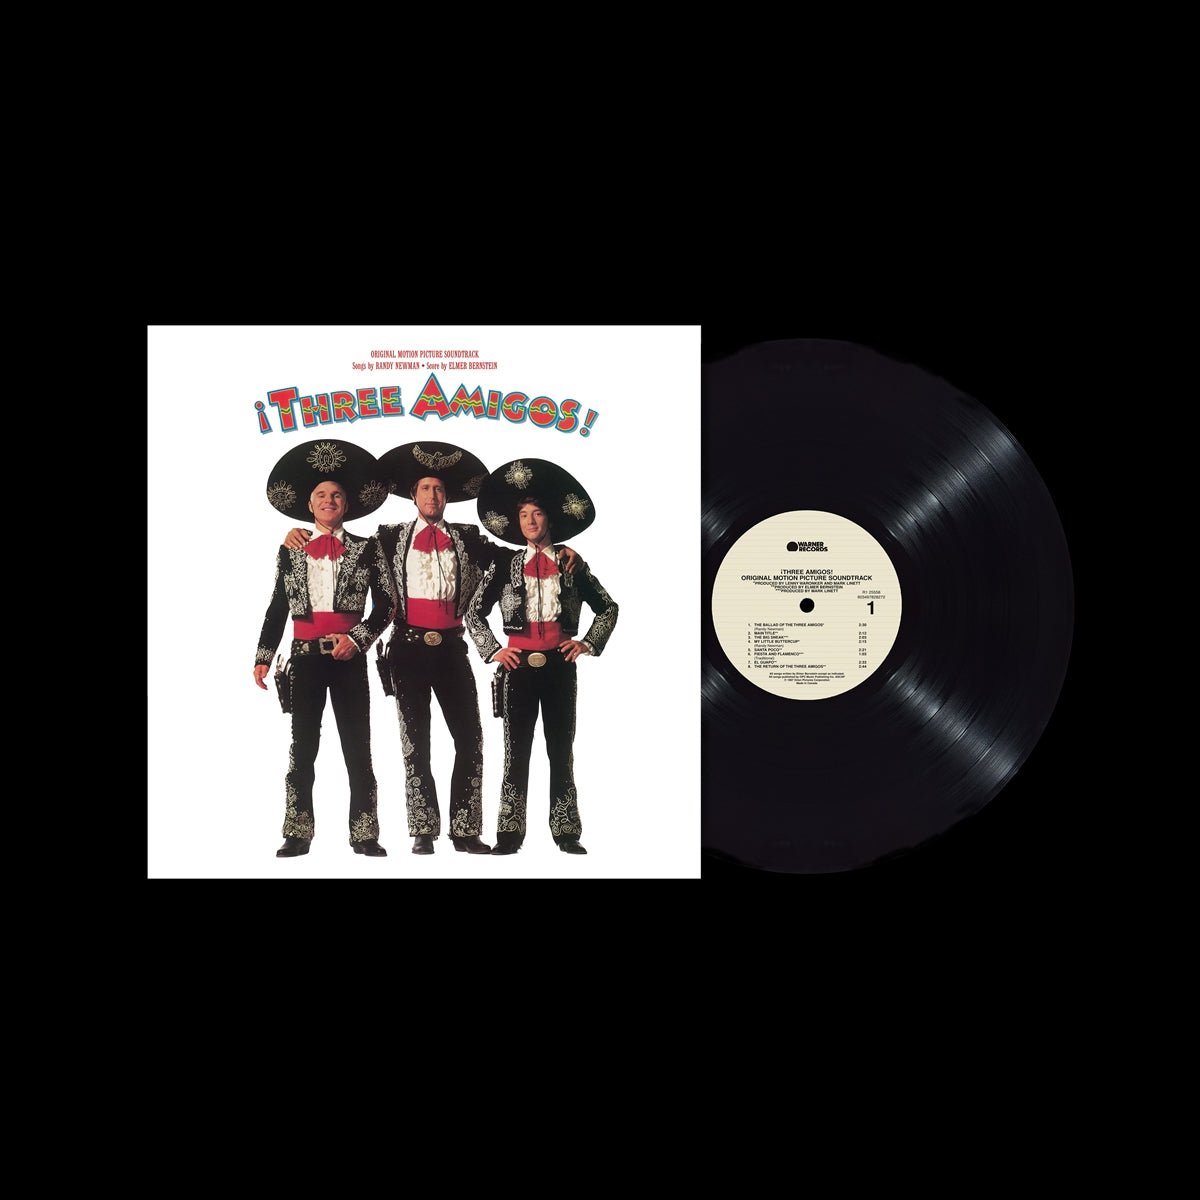 CHEVY CHASE , STEVE MARTIN and MARTIN SHORT in THREE AMIGOS -1986-. Greeting  Card by Album